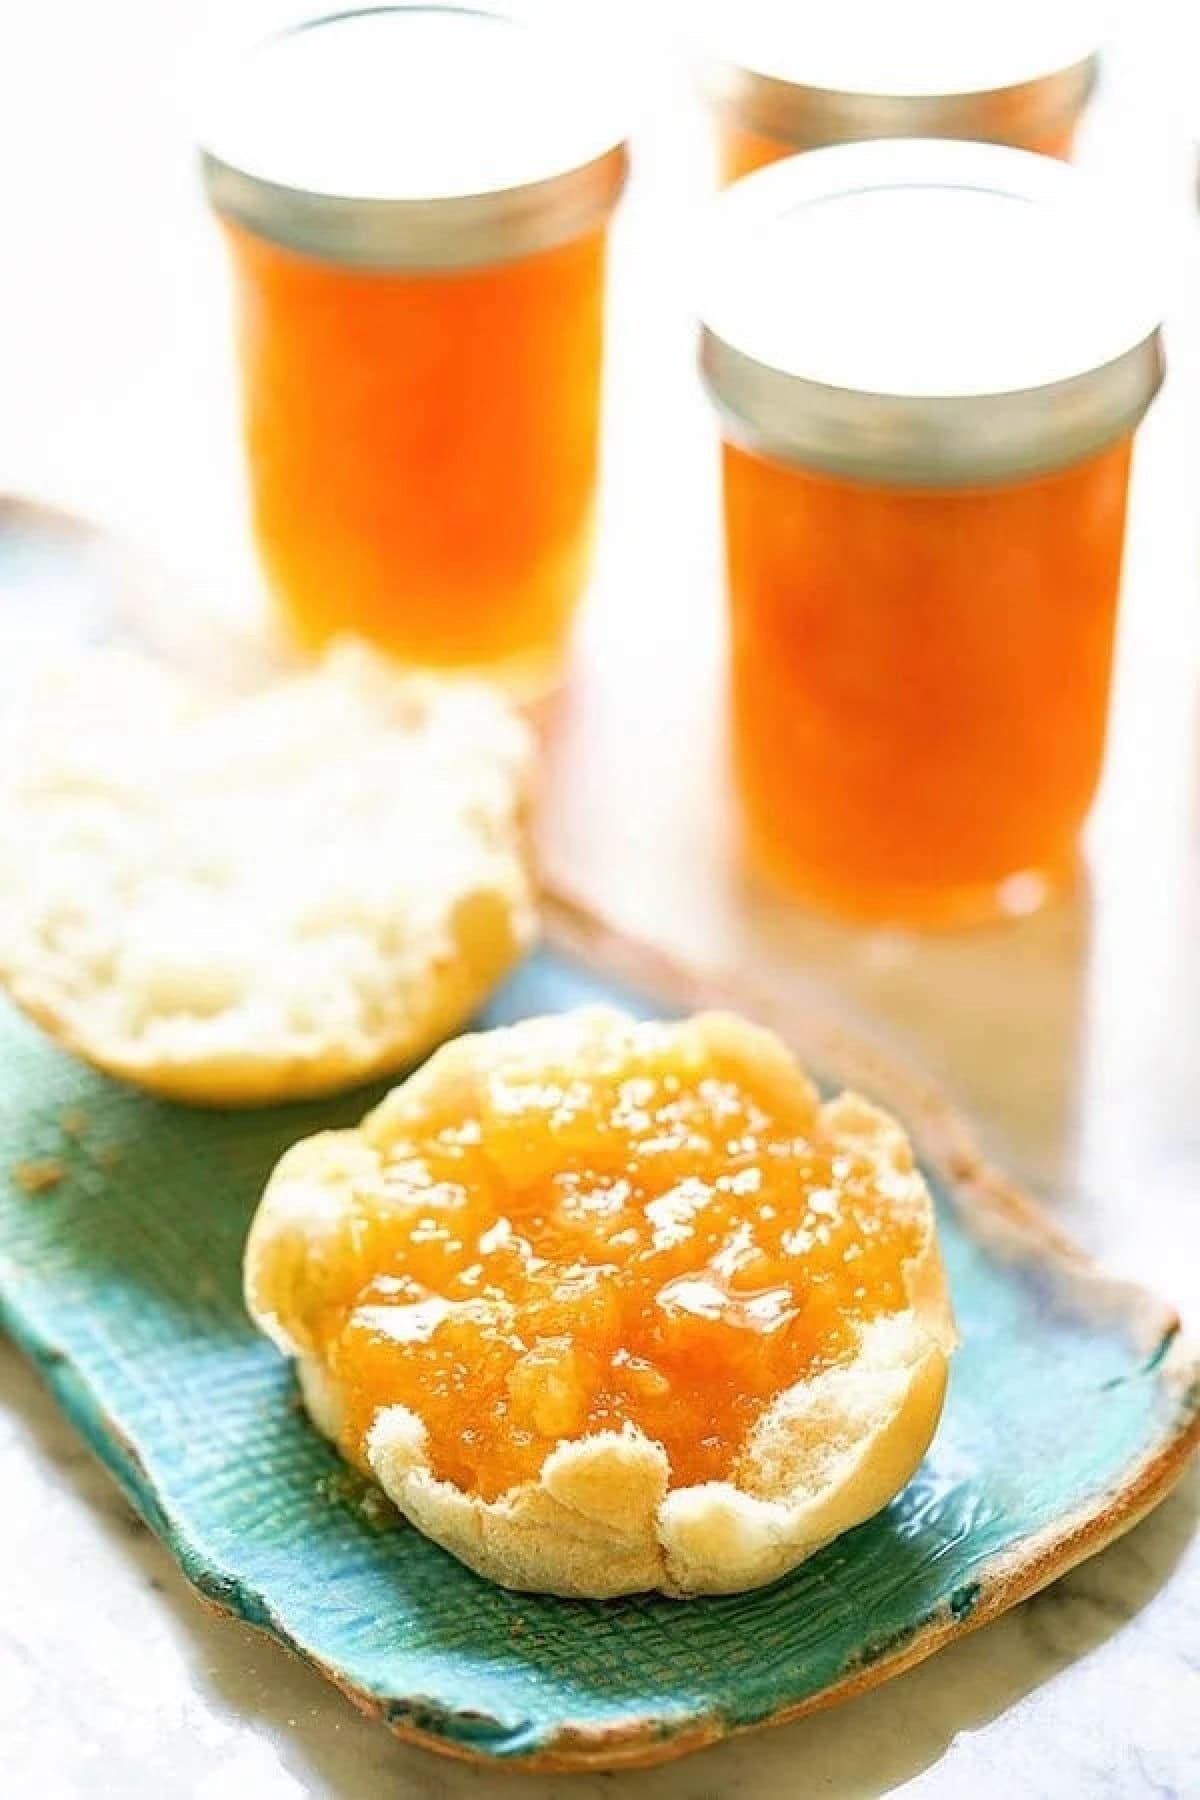 Apricot Jam spooned on a toasted English muffin on a green plate.